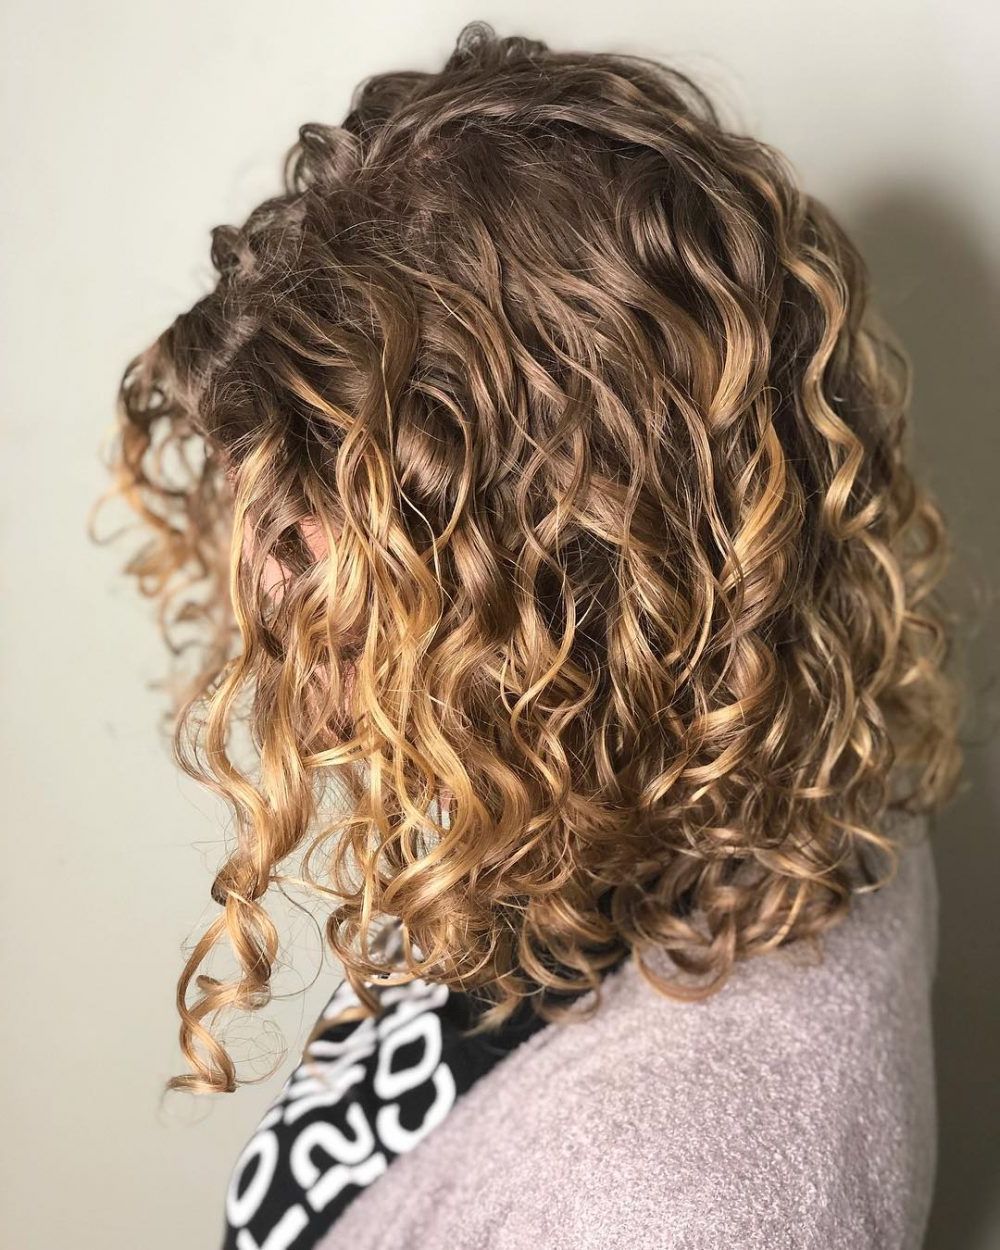 Preferred Medium Length Cascade Hairstyles Regarding 30 Gorgeous Medium Length Curly Hairstyles For Women In  (View 8 of 20)